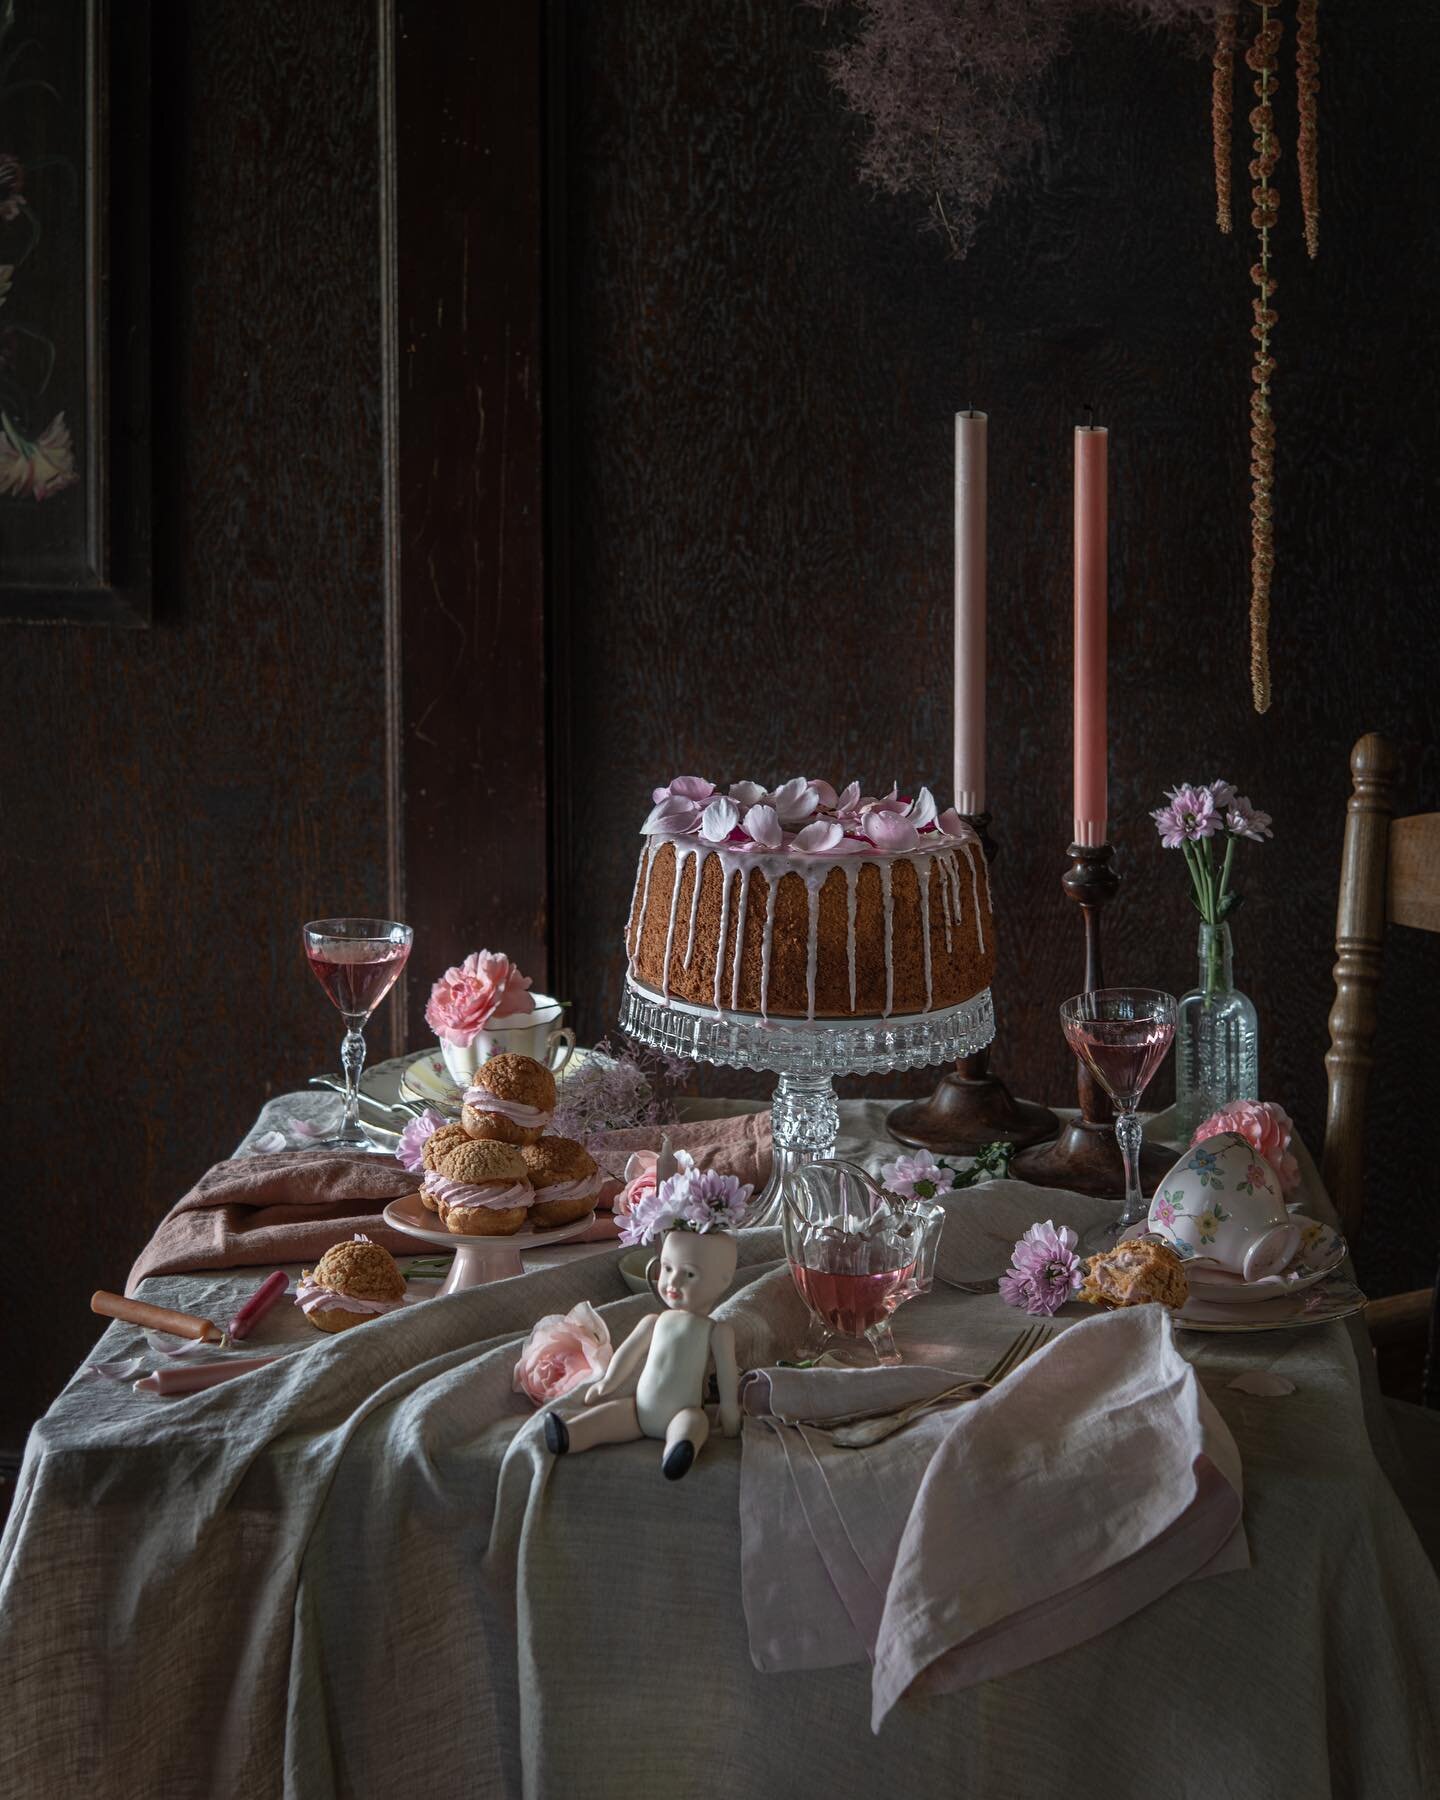 After the tea party.
A little messy cake scene, and a mish mash of florals in a moody atmosphere. 
My last photo for the @eatcaptureshare_ challenge, a table scene with the theme where food is shown in a lifestyle setting. Maybe not oozing sophistica